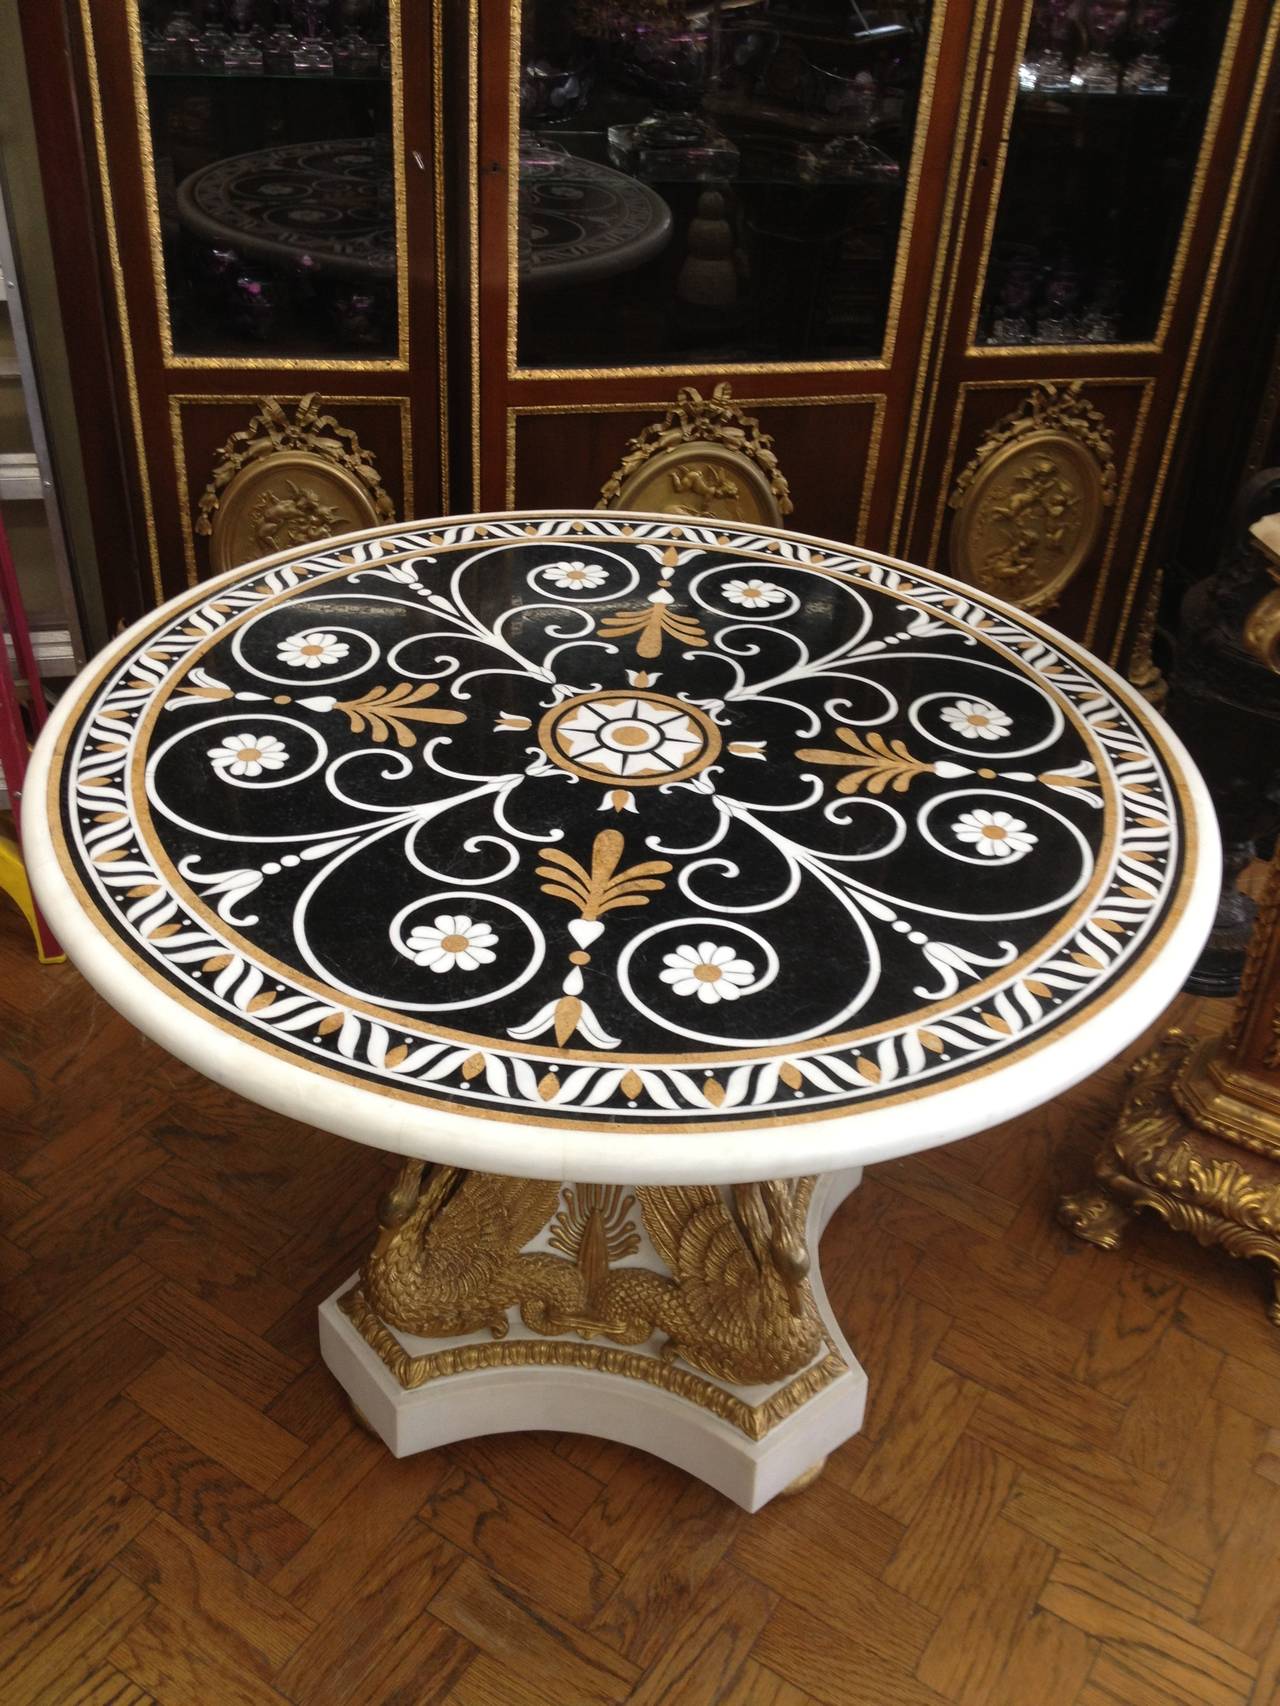 A 20th Century Italian Style Marble Inlaid & Gilt Wood Mounted Center Table

Dimensions: Height: 32", Diameter: 45"

Excellent Condition

